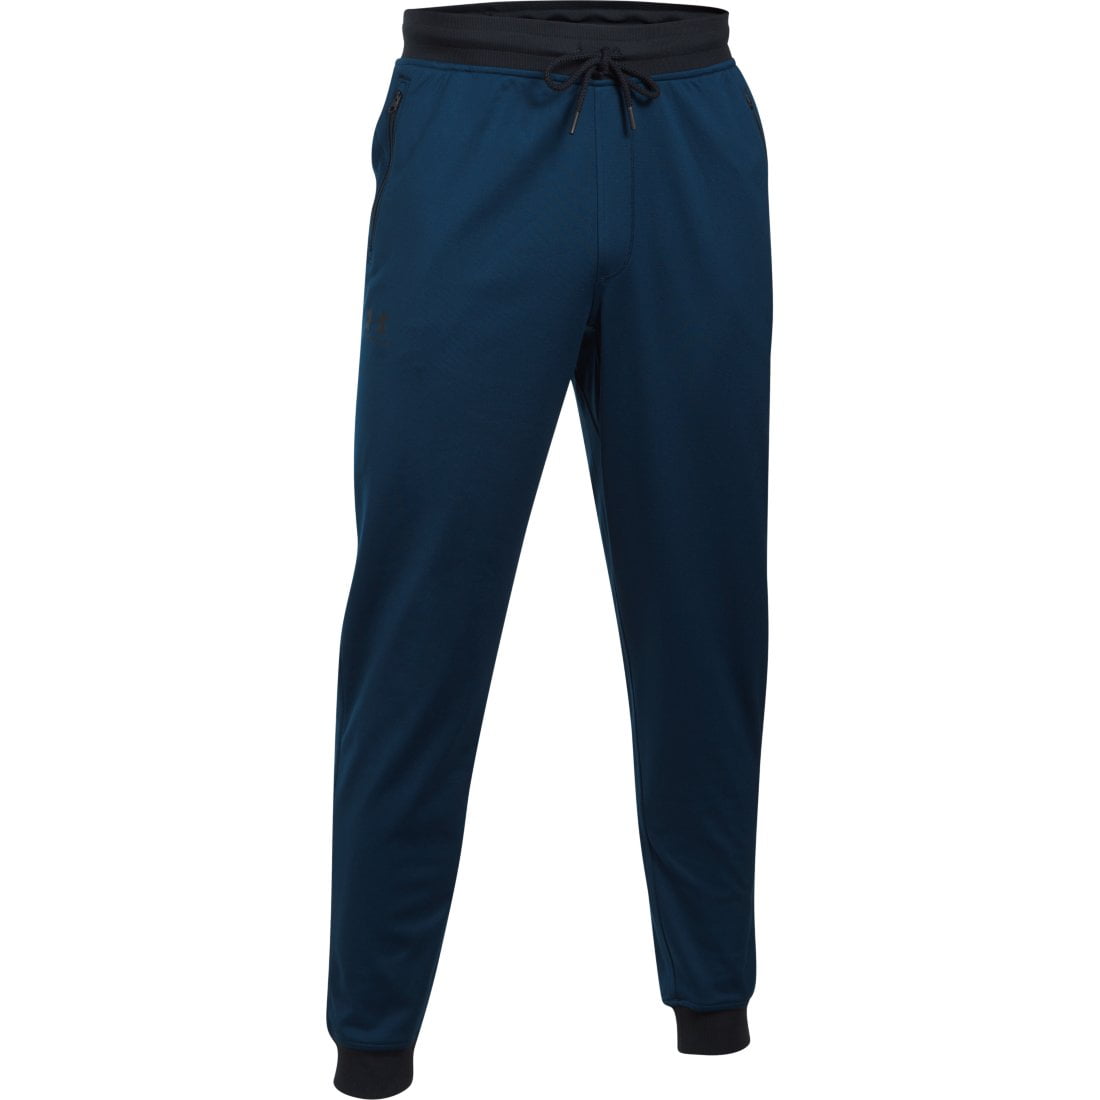 Under Armour Sportstyle Jogger Pant Black 1290261-001 - Free